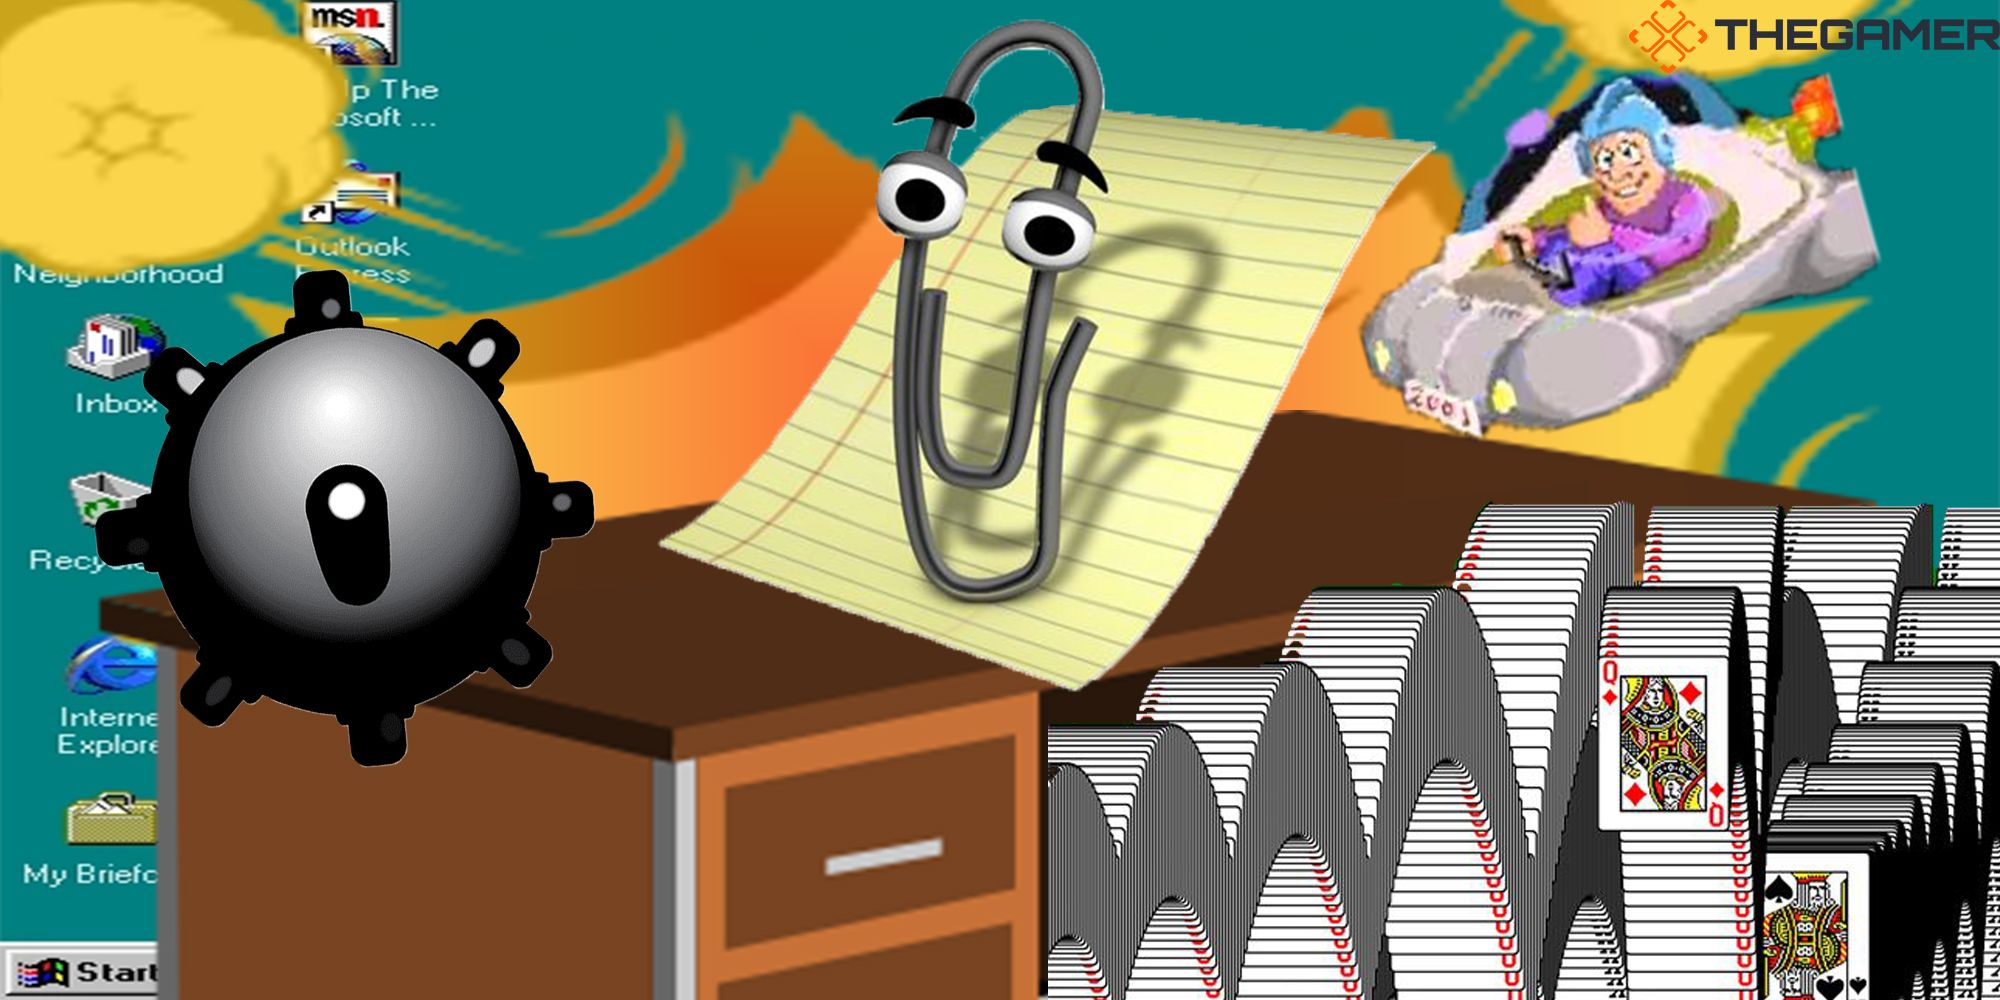 Clippy, jumping solitaire cards, a mine, and the pinball space cadet face off in the Windows 95 Game Multiverse.